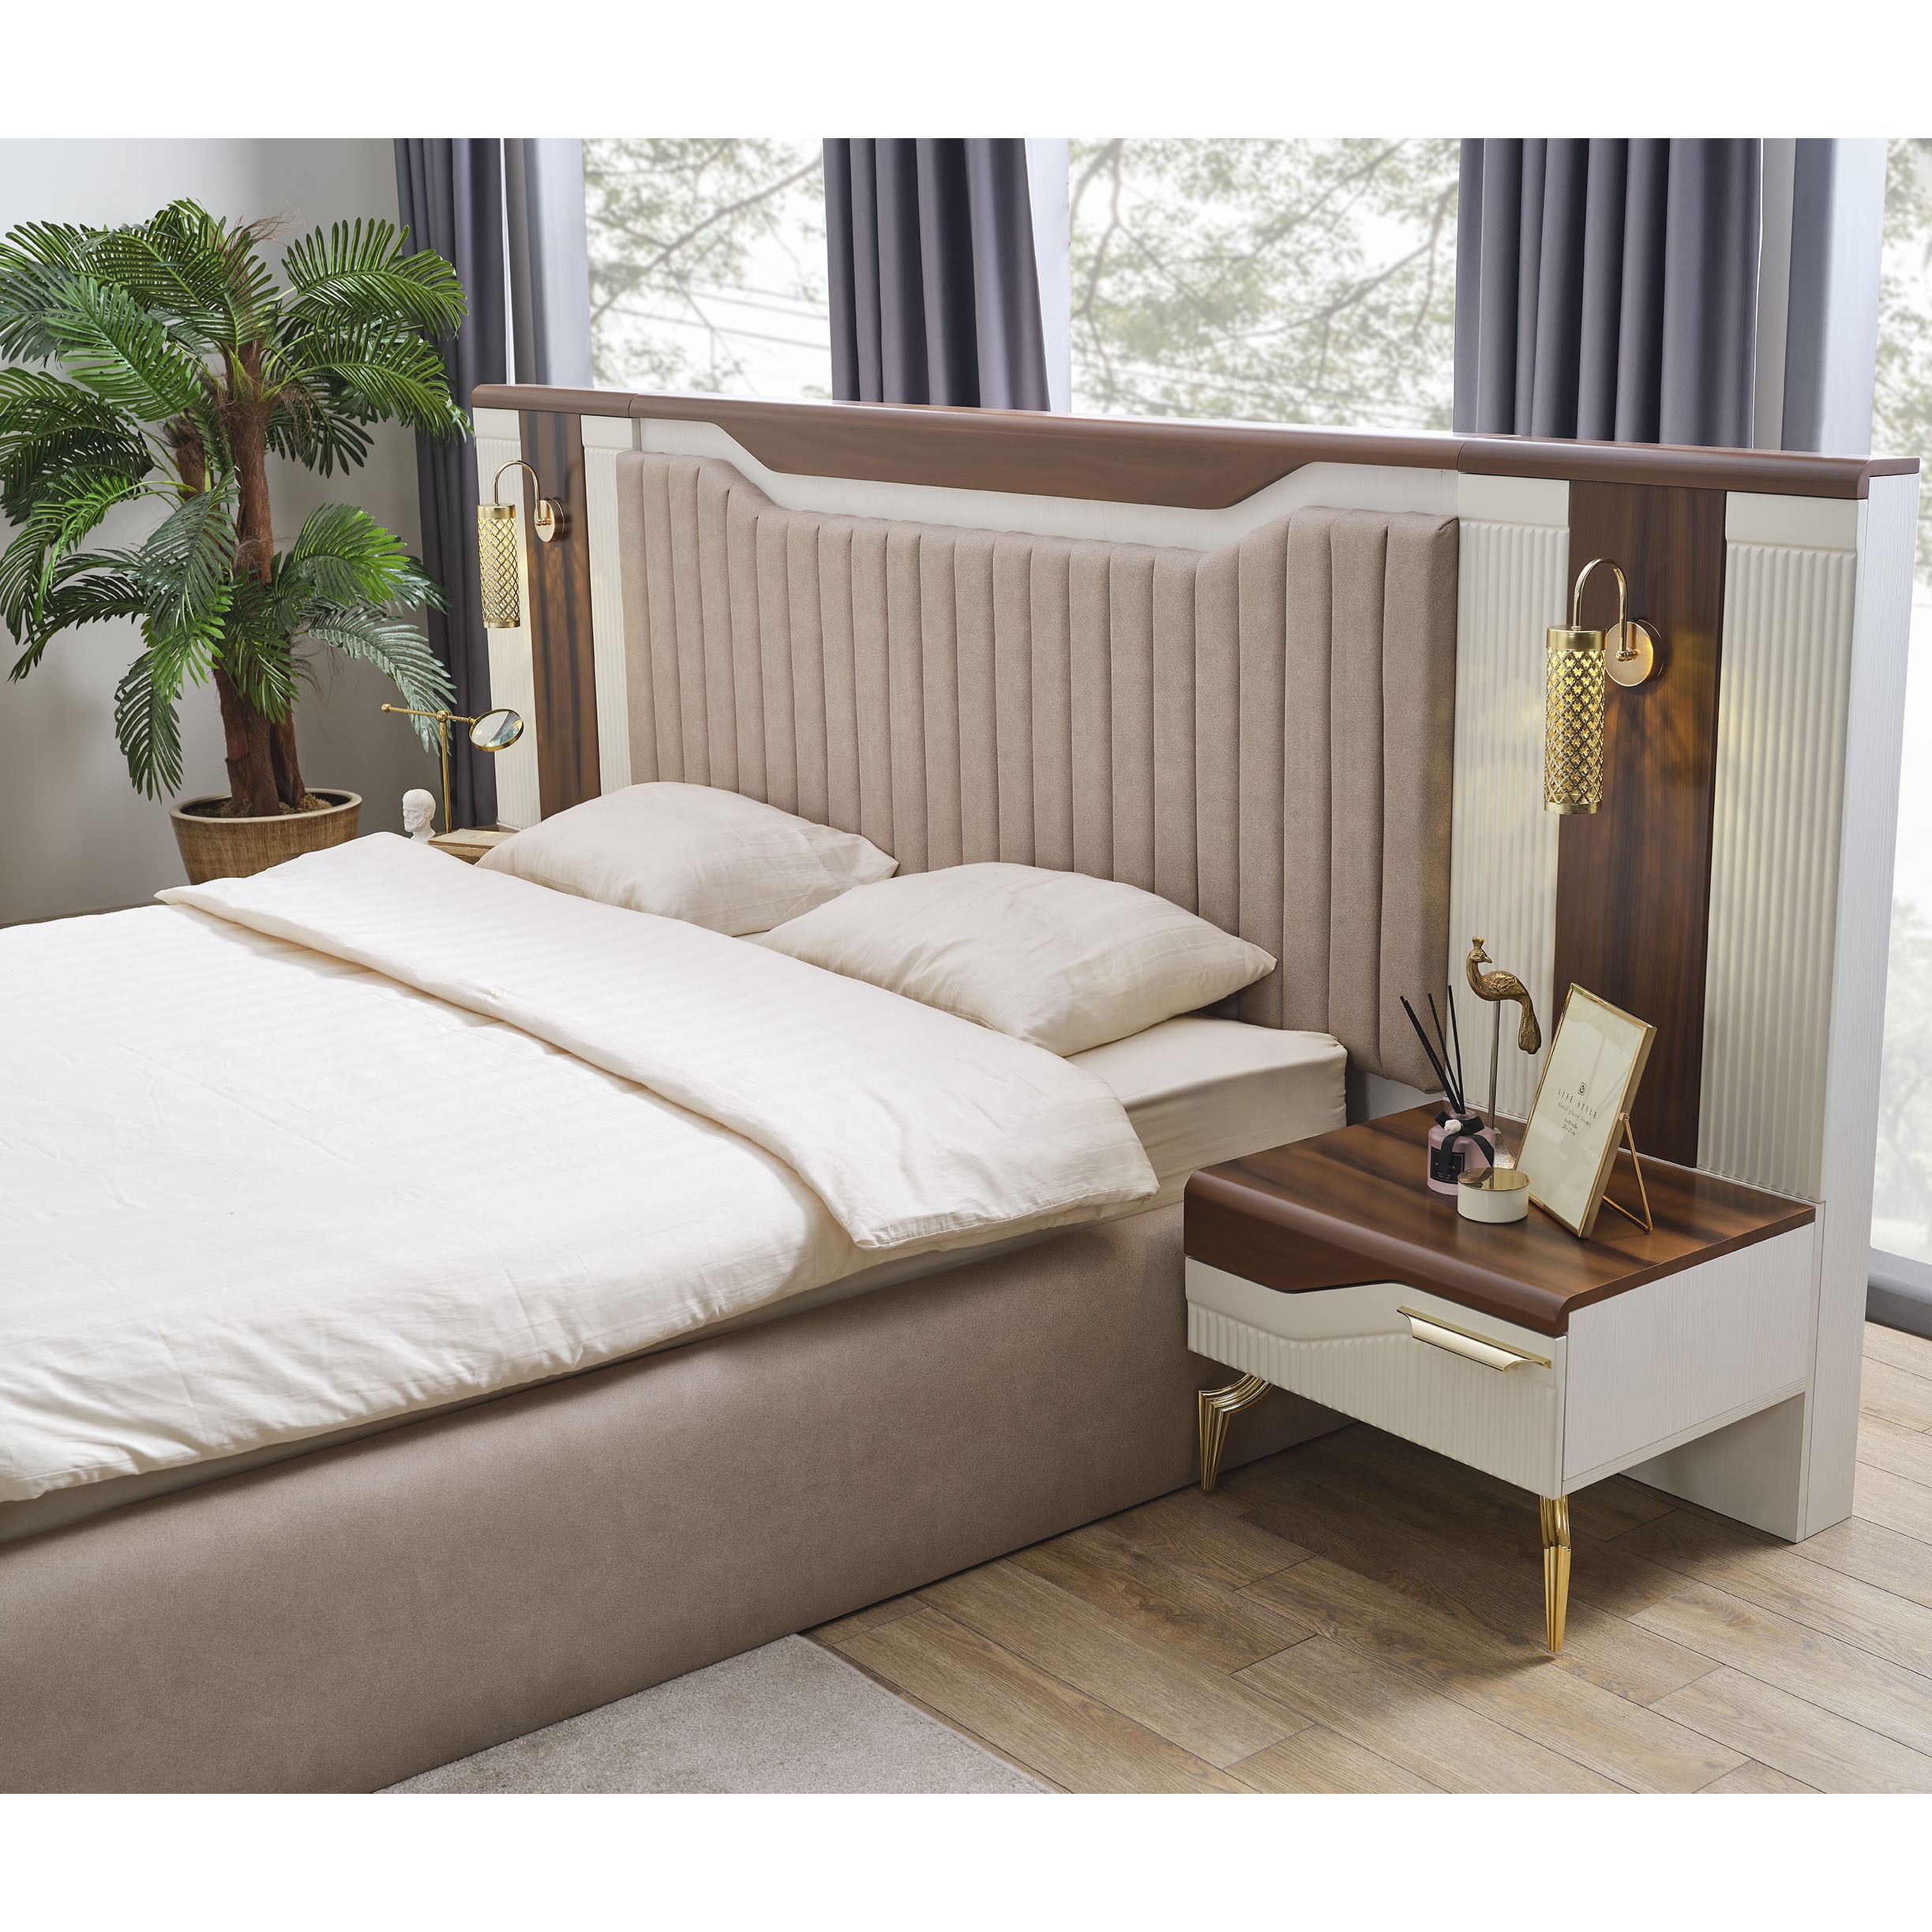 Style Hermes Vol1 Bed Without Storage 180x200 cm